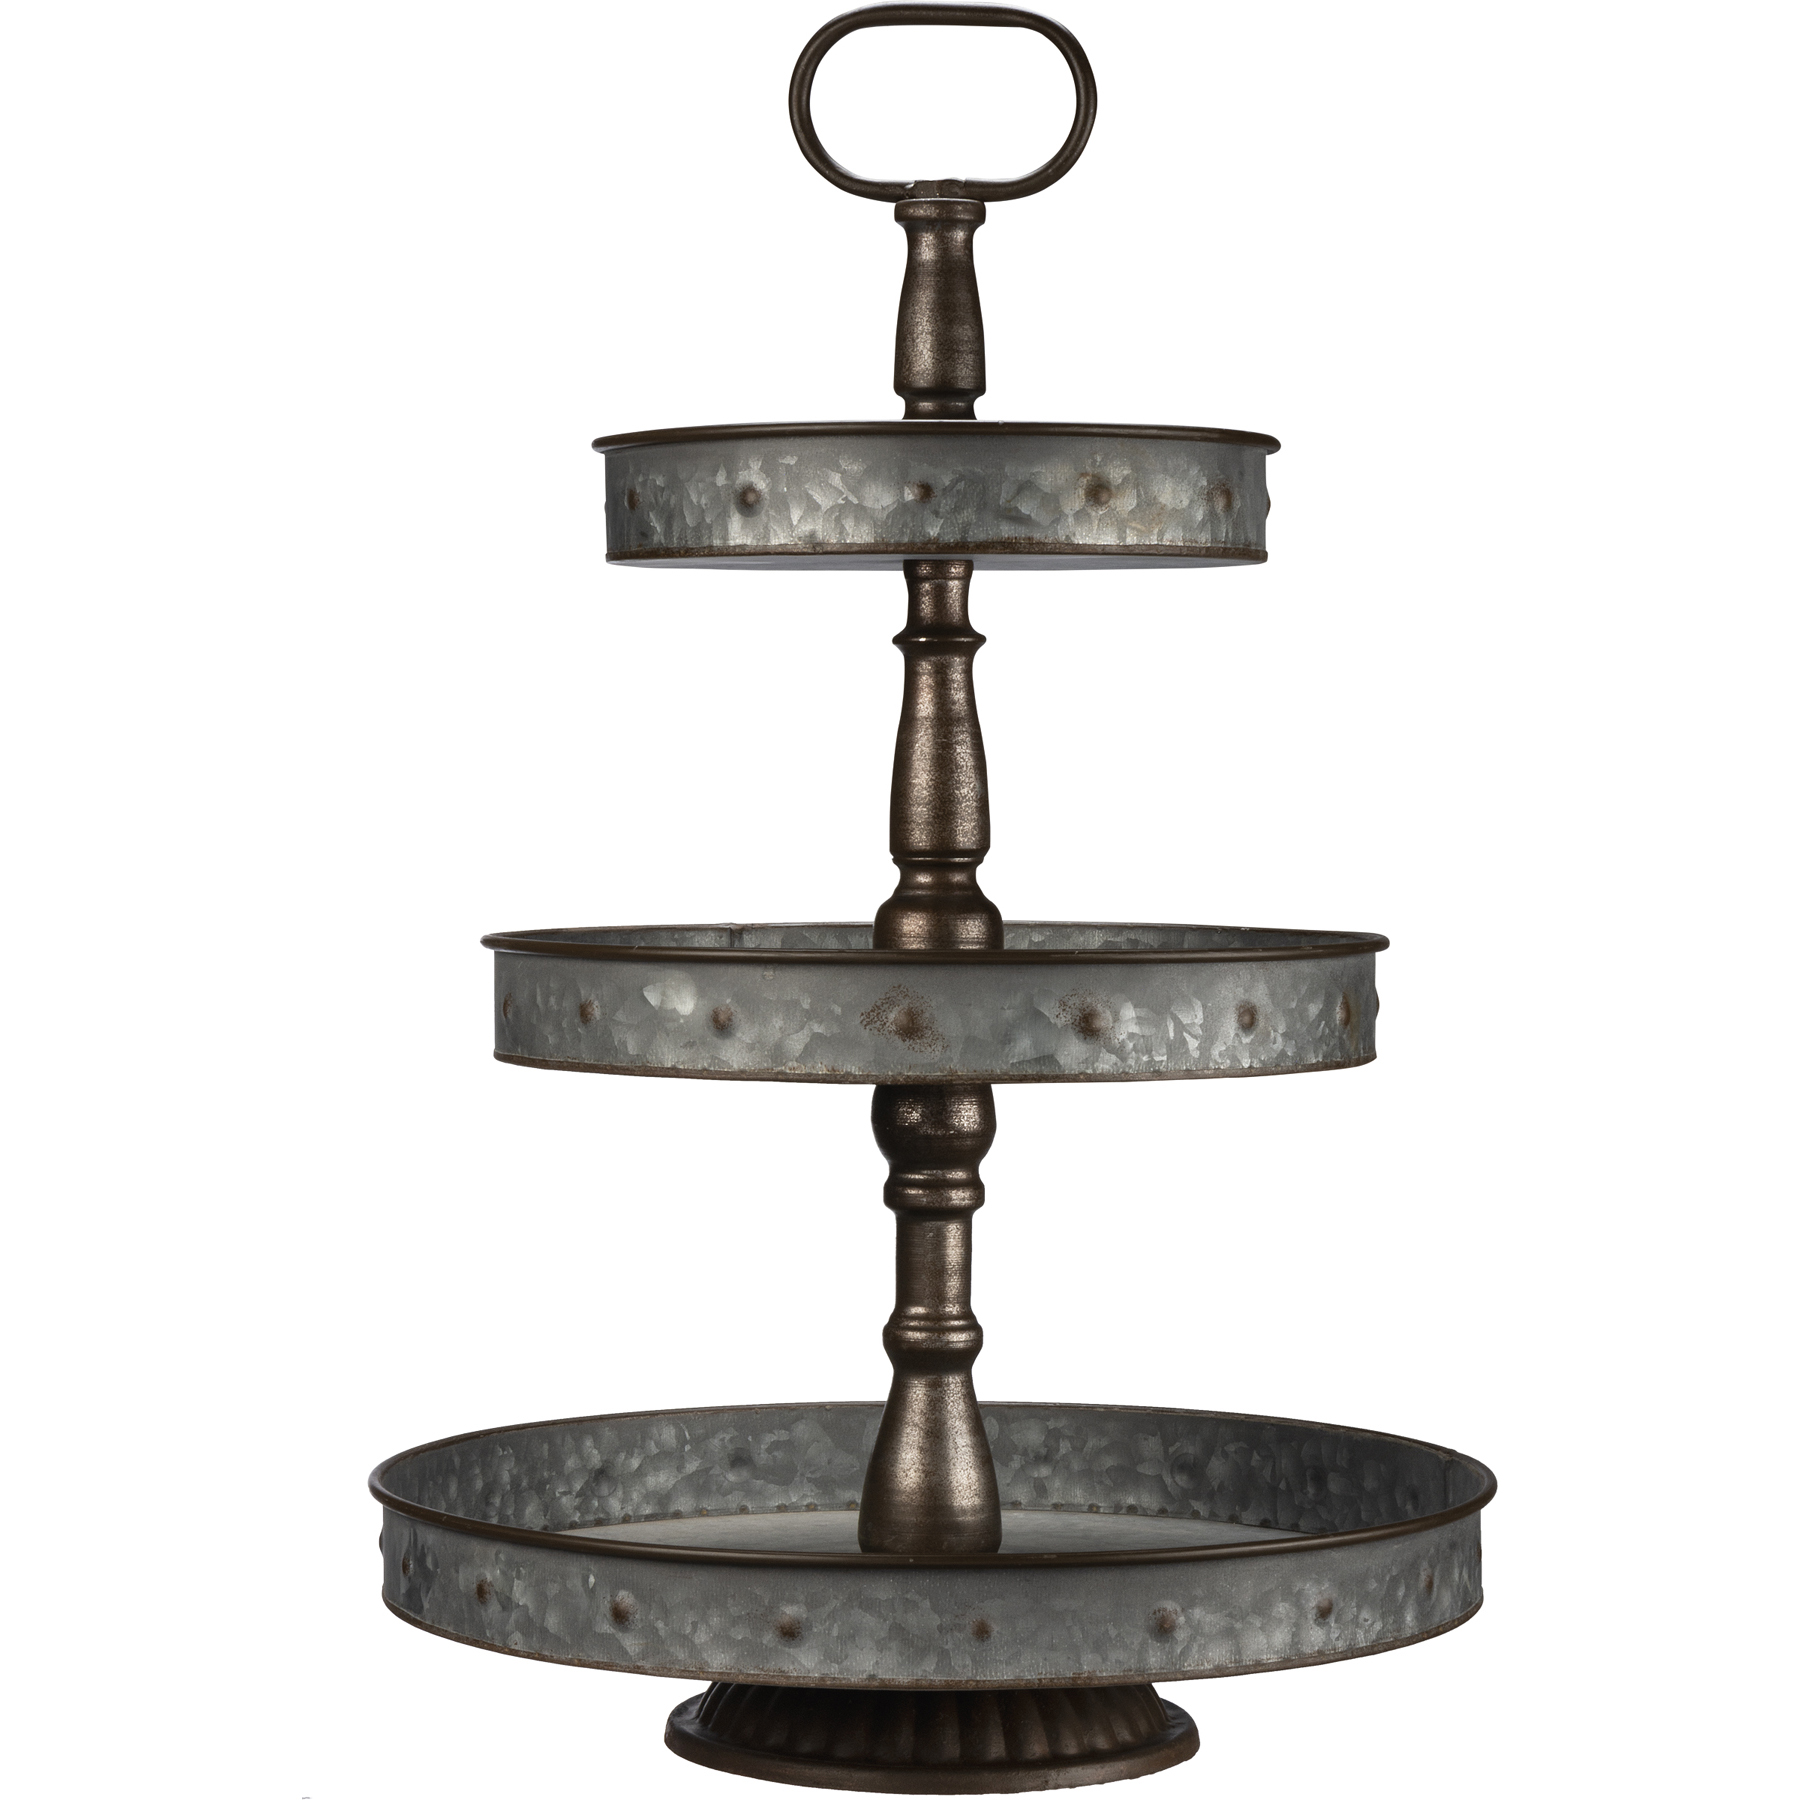 Primitives by Kathy Rustic 3 Tier Round Tray Display Farmhouse Galvanized Metal